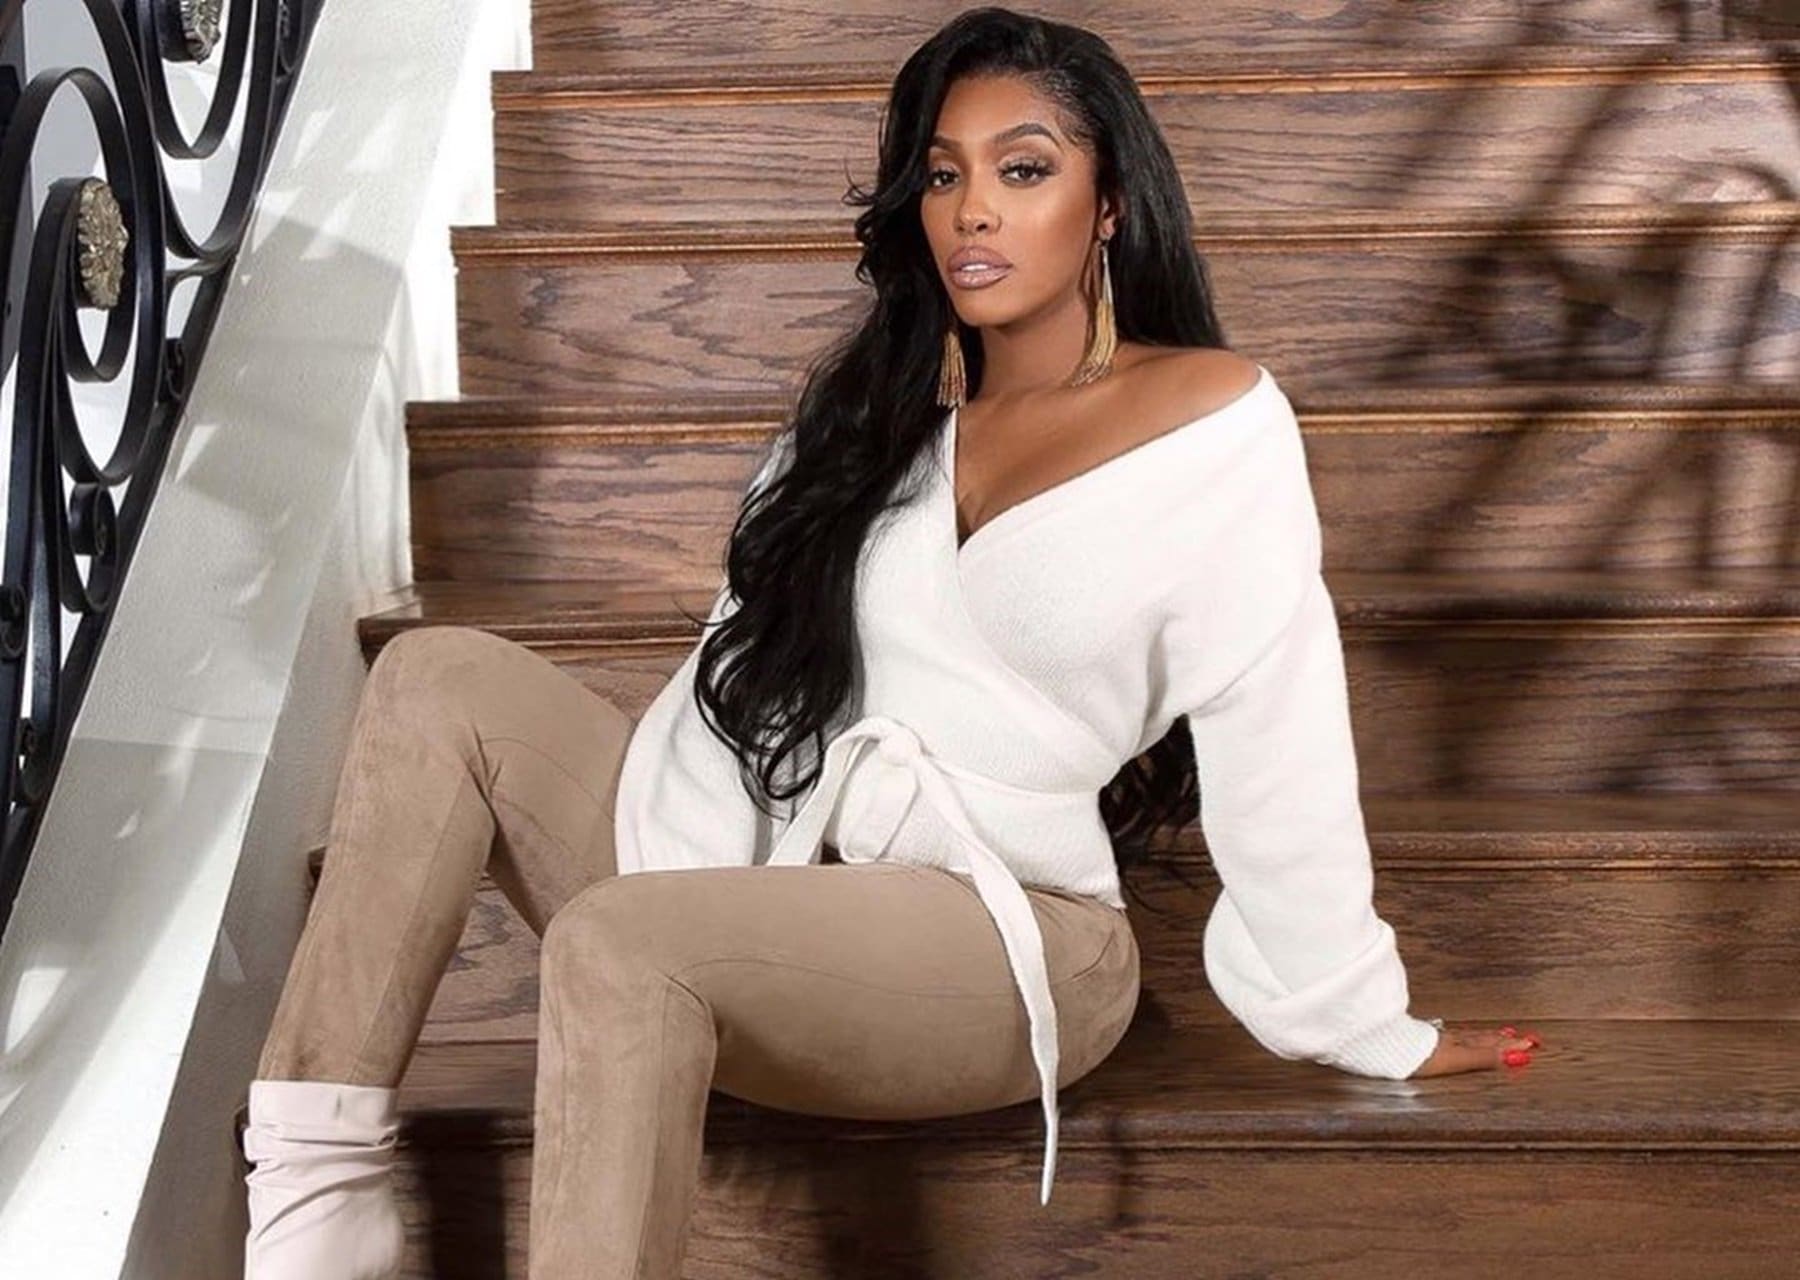 Porsha Williams' Daughter, Pilar Jehna Meets Her Grandma's Side Of The Family - See The Exciting Photos